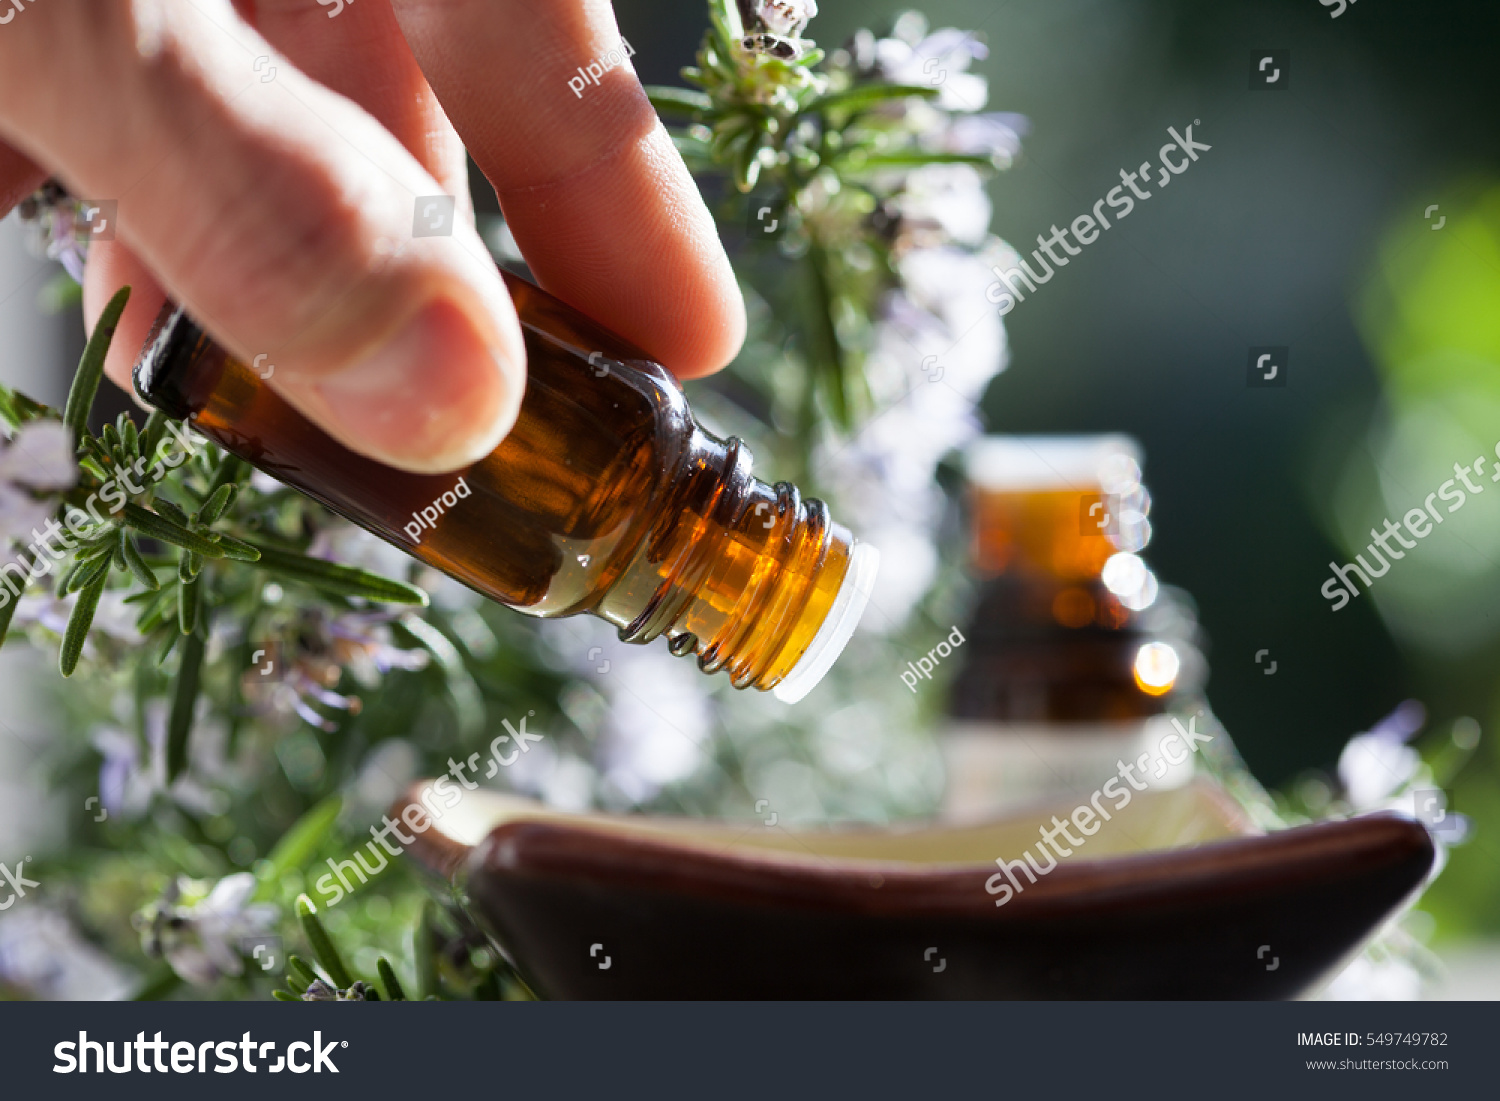 pour rosemary essential oil in a bowl #549749782